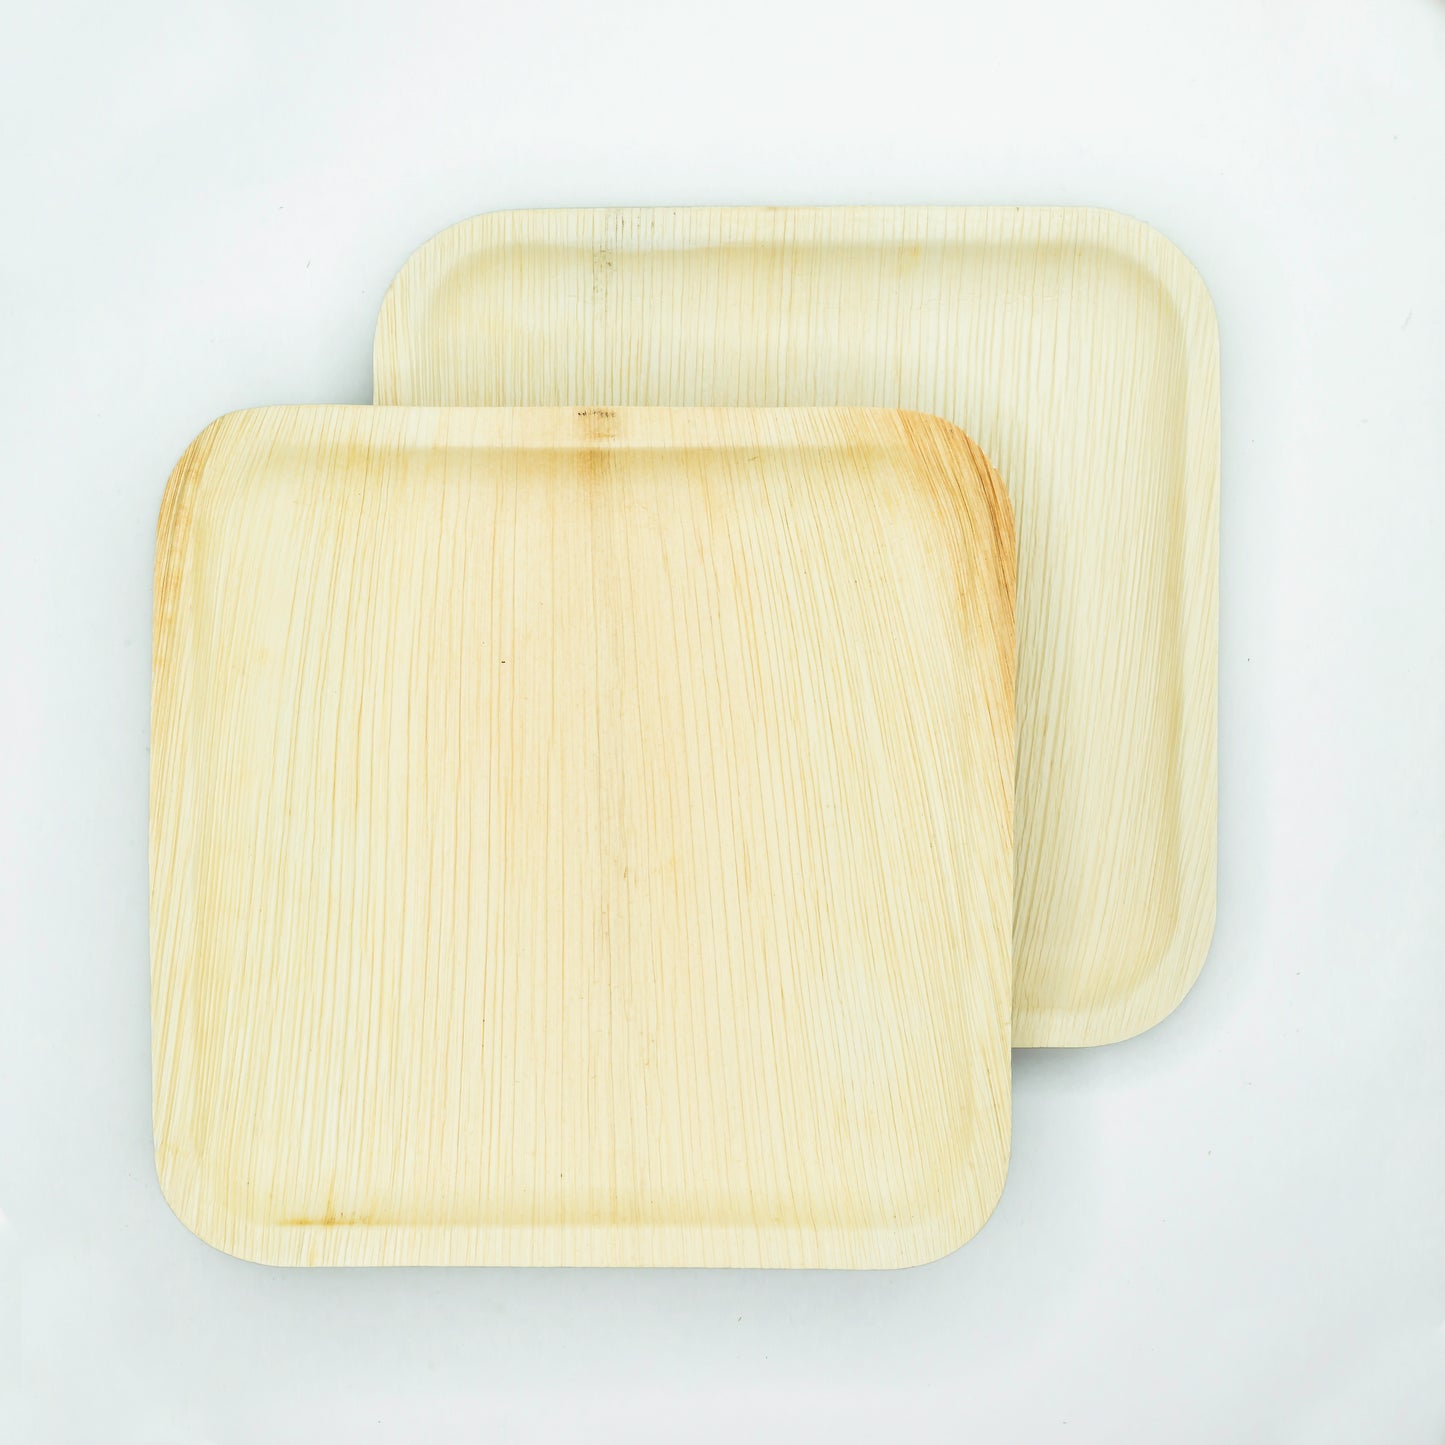 10" / 25 cm Square Palm Leaf Plate - Eco Leaf Products